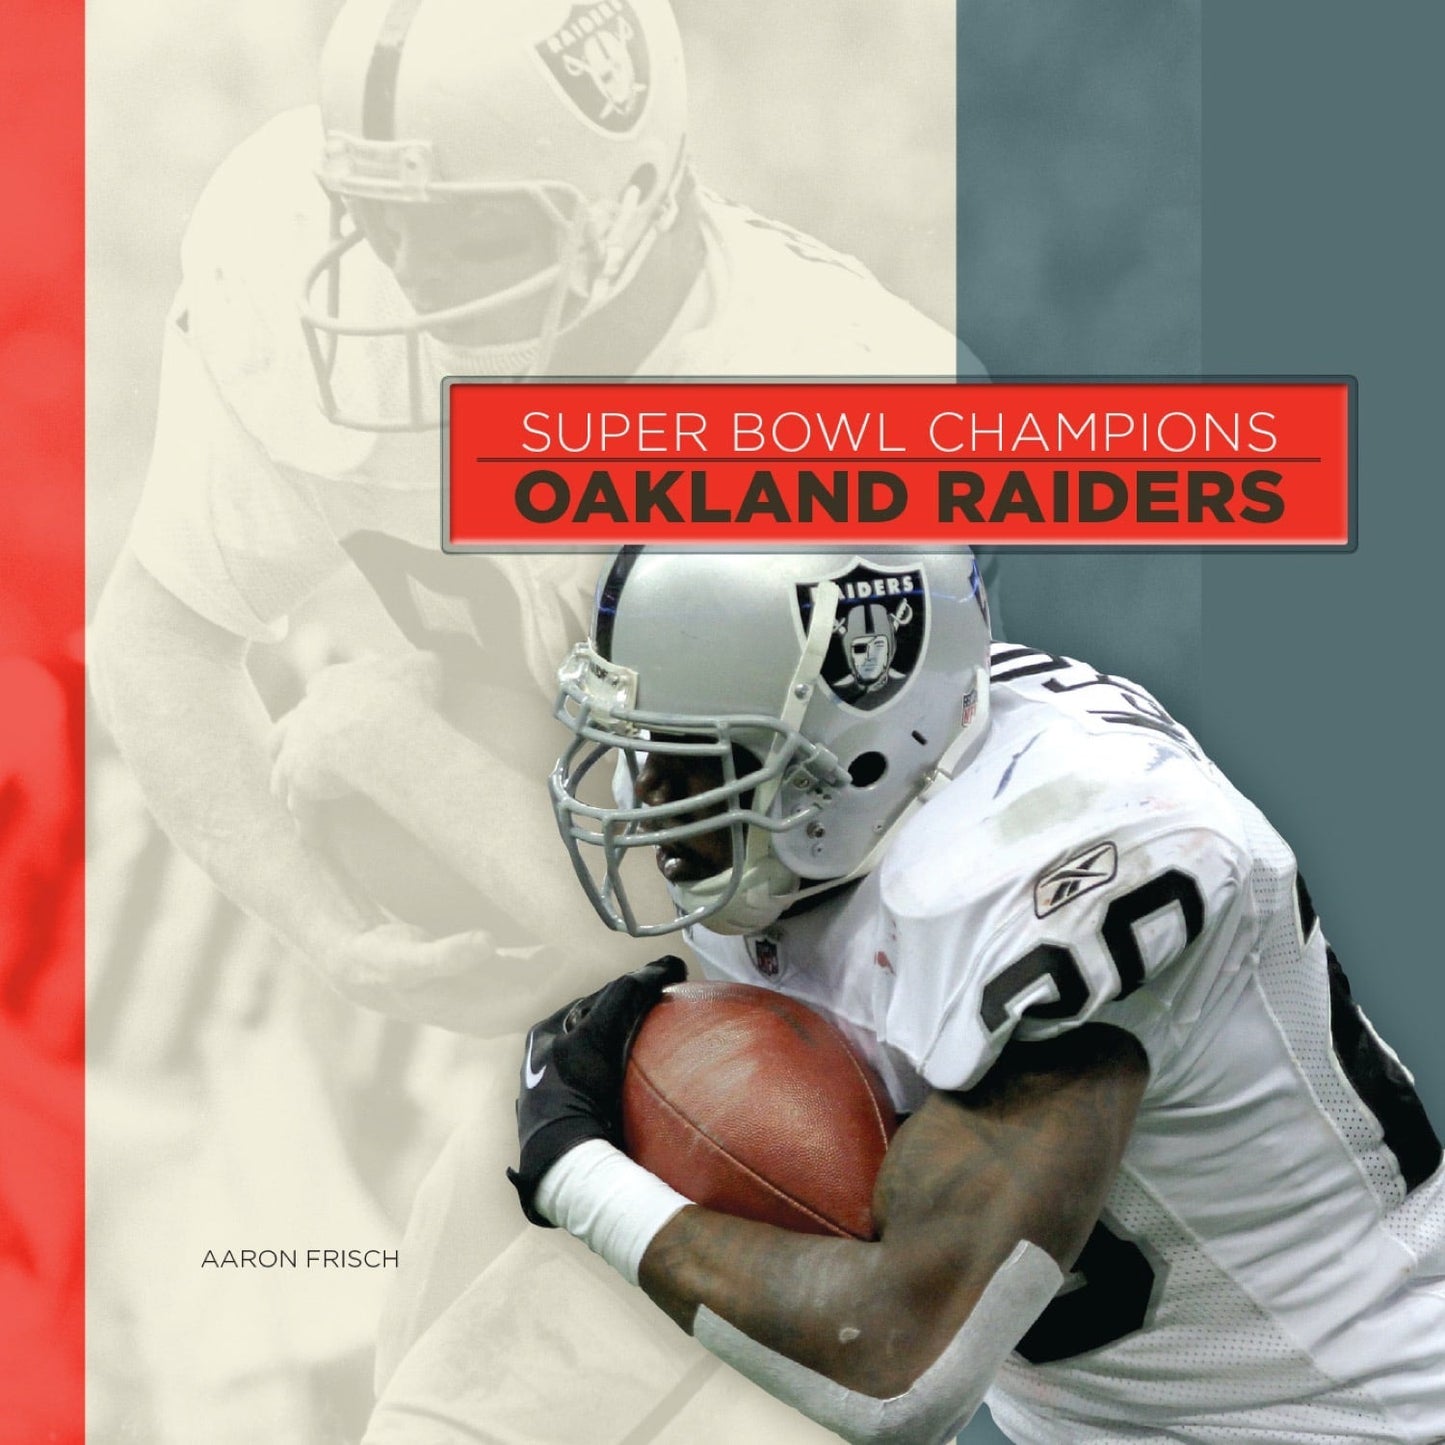 Super Bowl Champions: Oakland Raiders (2014) by The Creative Company Shop